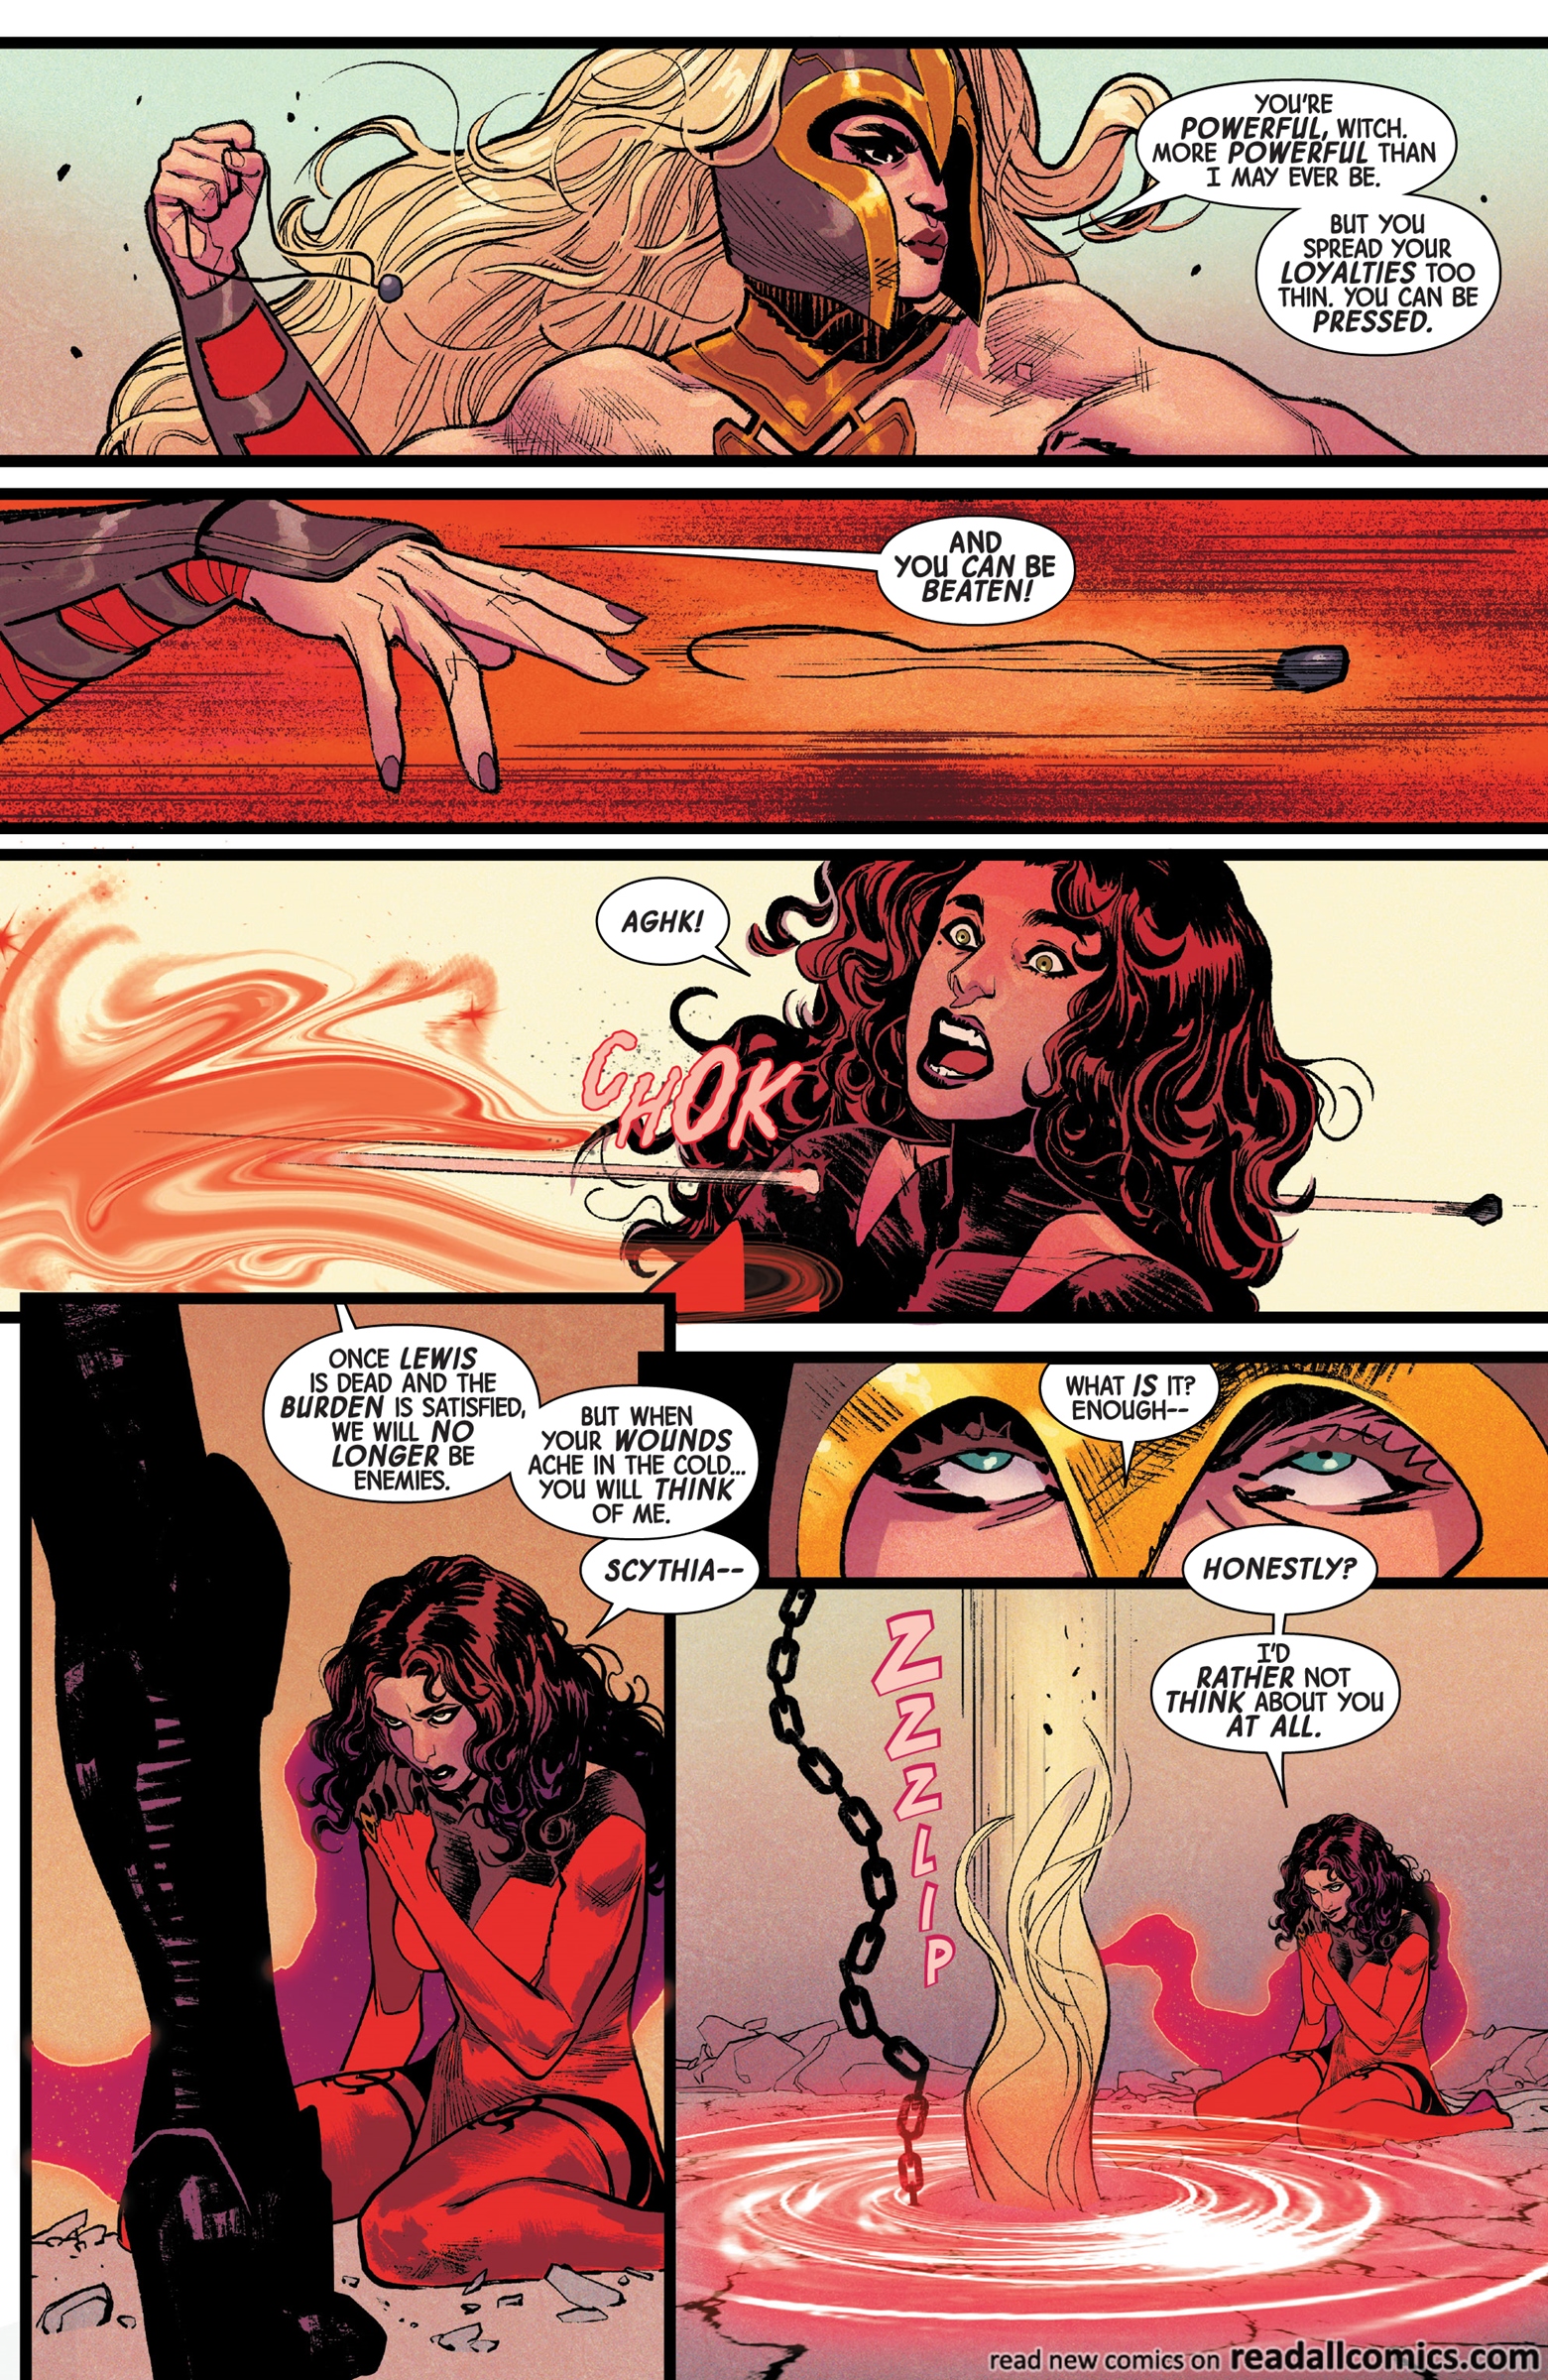 Scarlet Witch V1 004, Read Scarlet Witch V1 004 comic online in high  quality. Read Full Comic online for free - Read comics online in high  quality .